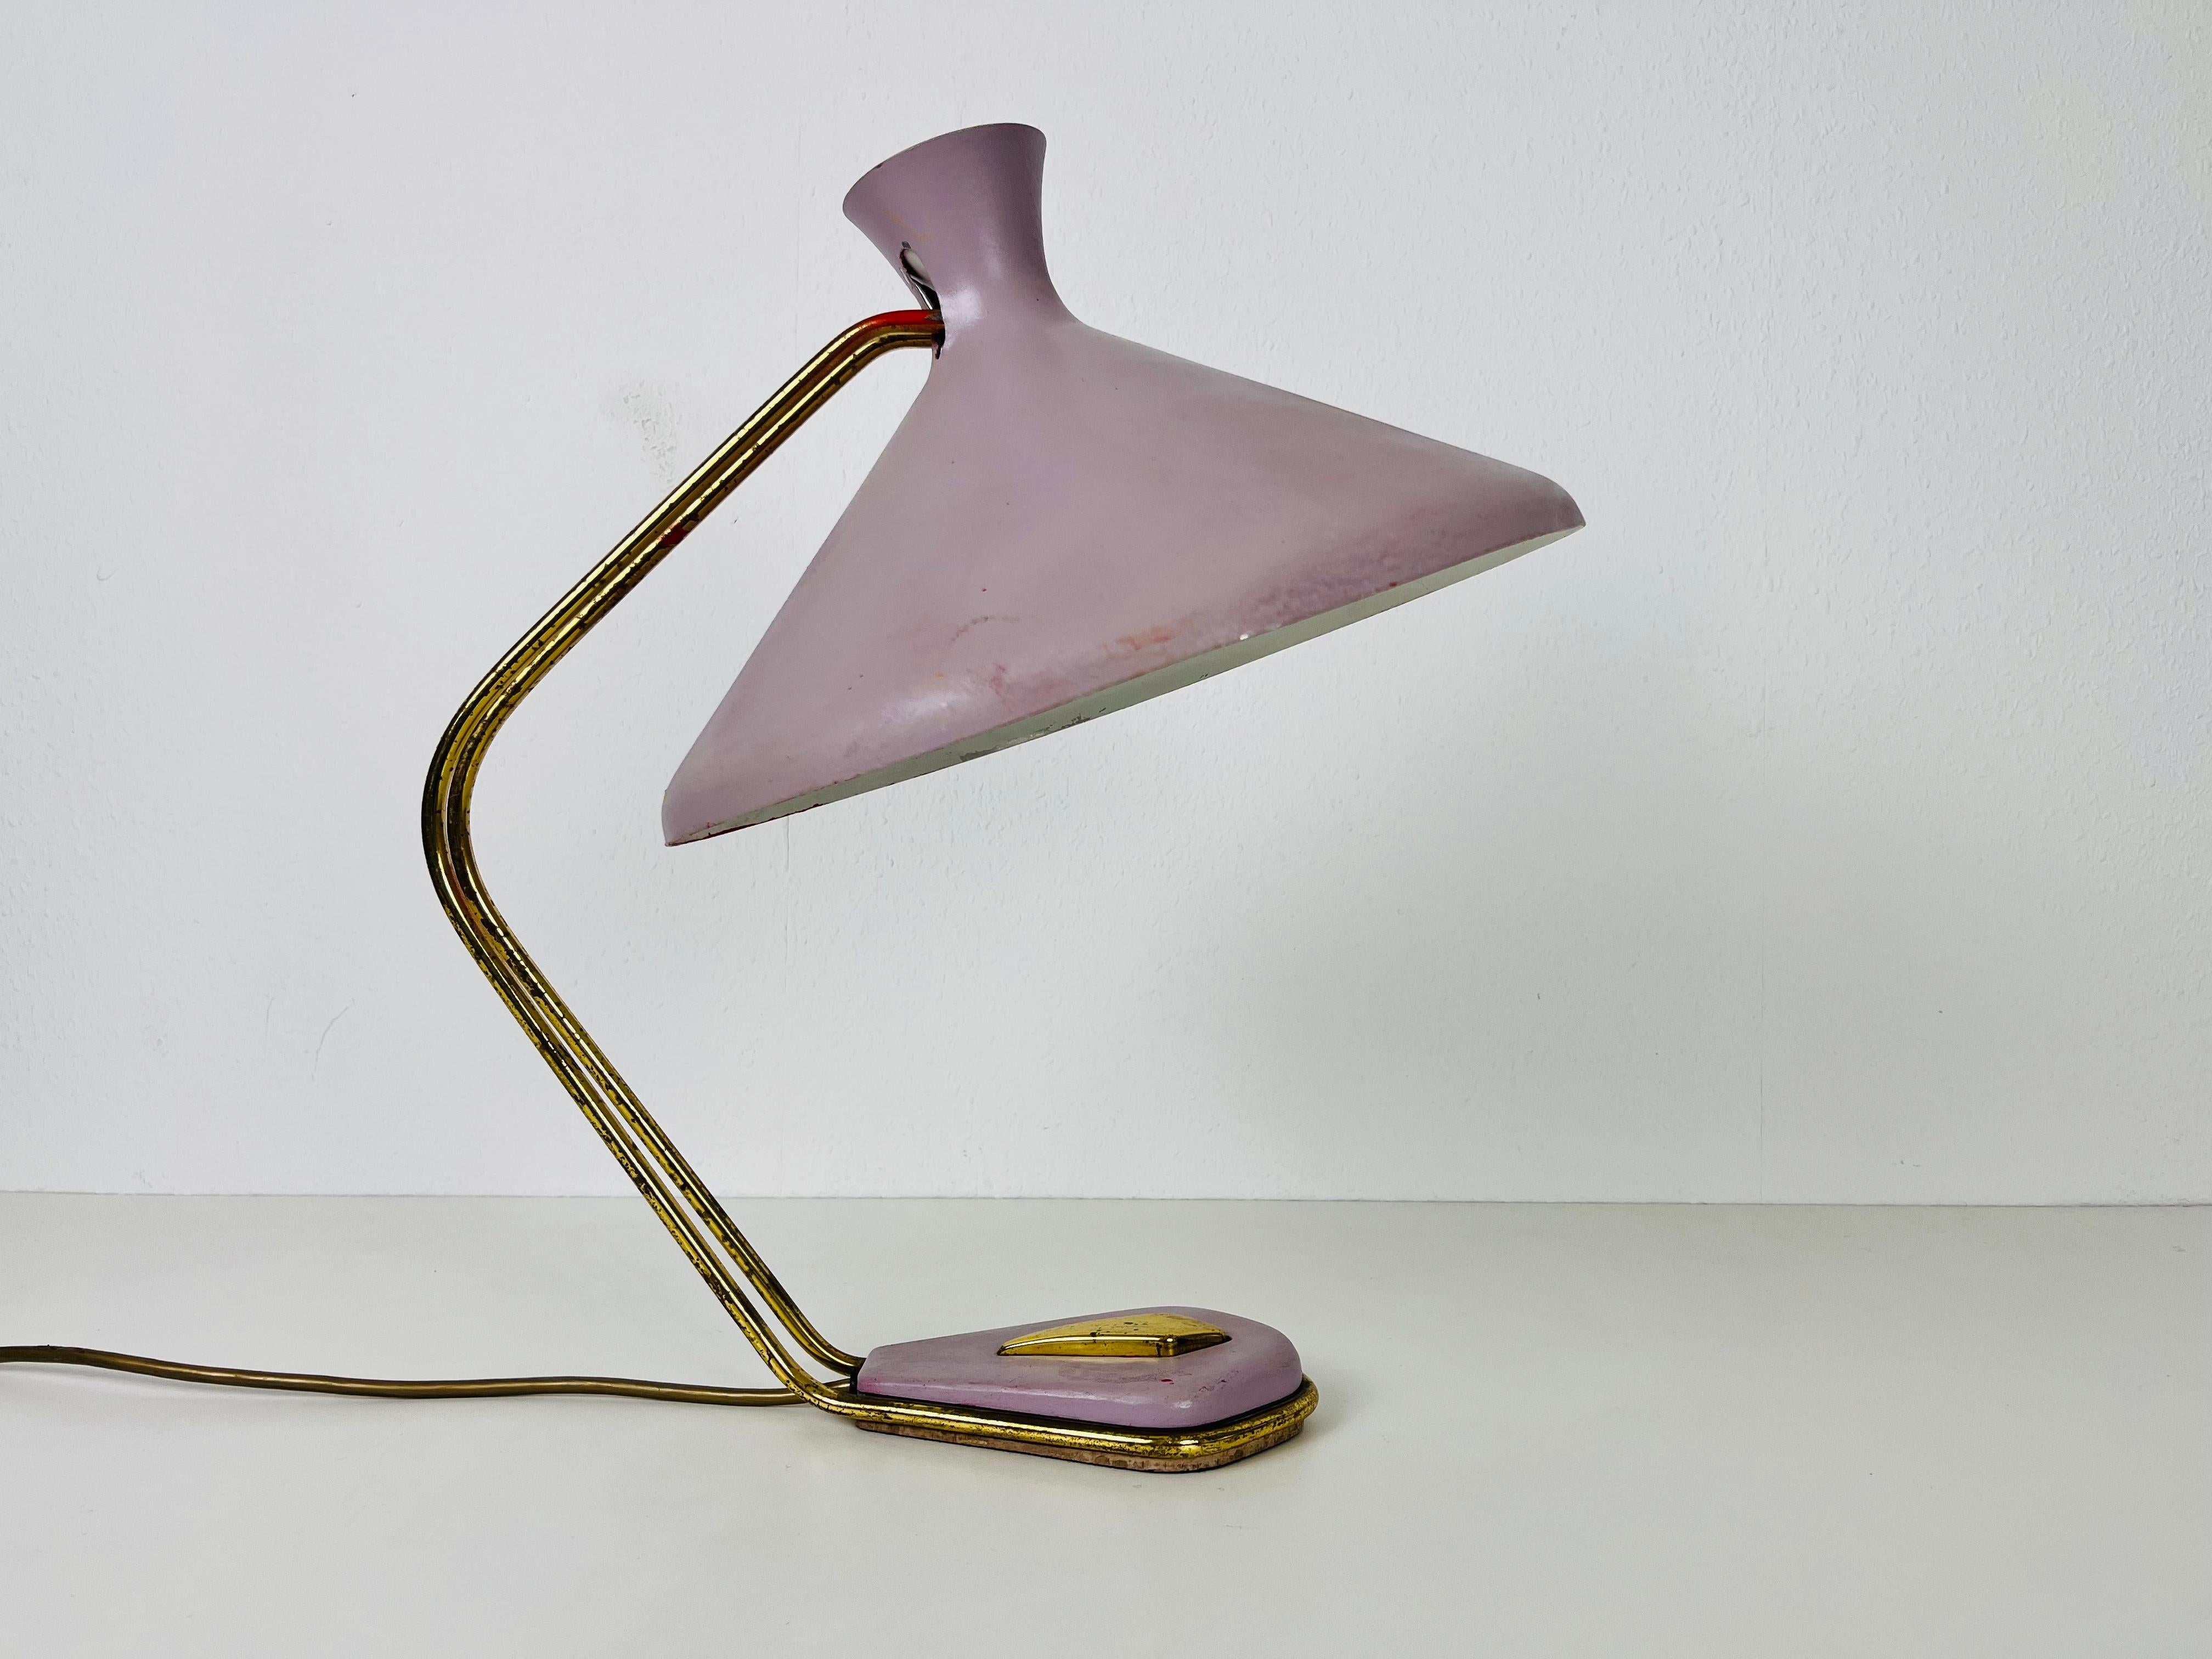 An Italian table lamp made in the 1960s. The lighting has an exceptional design which is similar to the table lamps made by Stilnovo. It is made of brass with a beautiful metal shade.

The light requires one E27 (US E26) light bulb. Works with